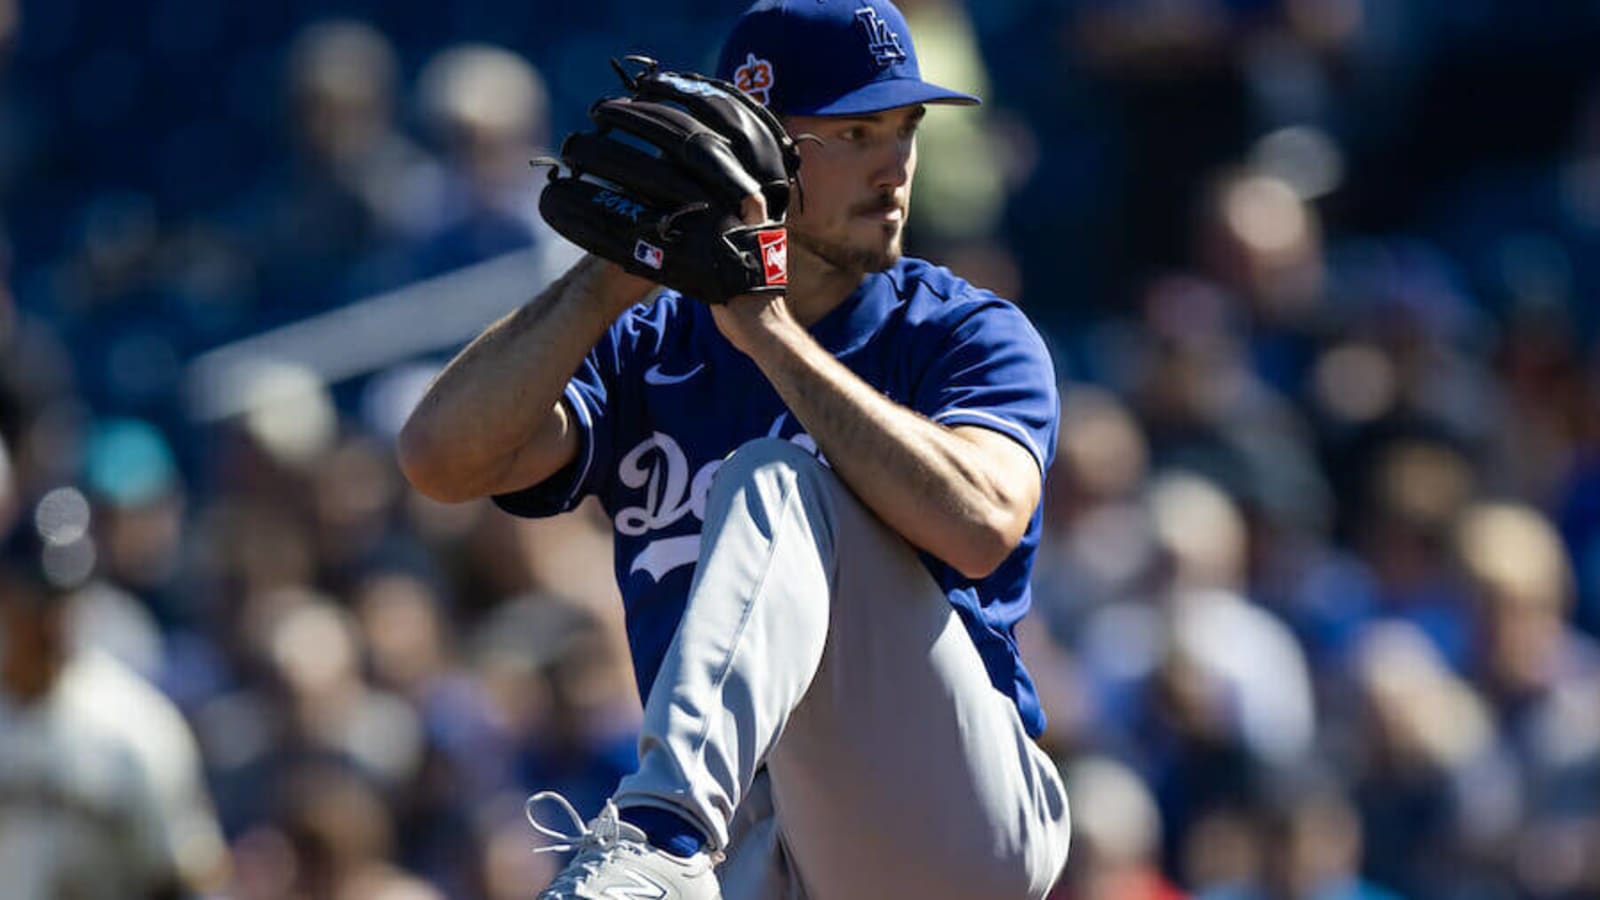 Los Angeles Dodgers' Victor Gonzalez plays during the first inning